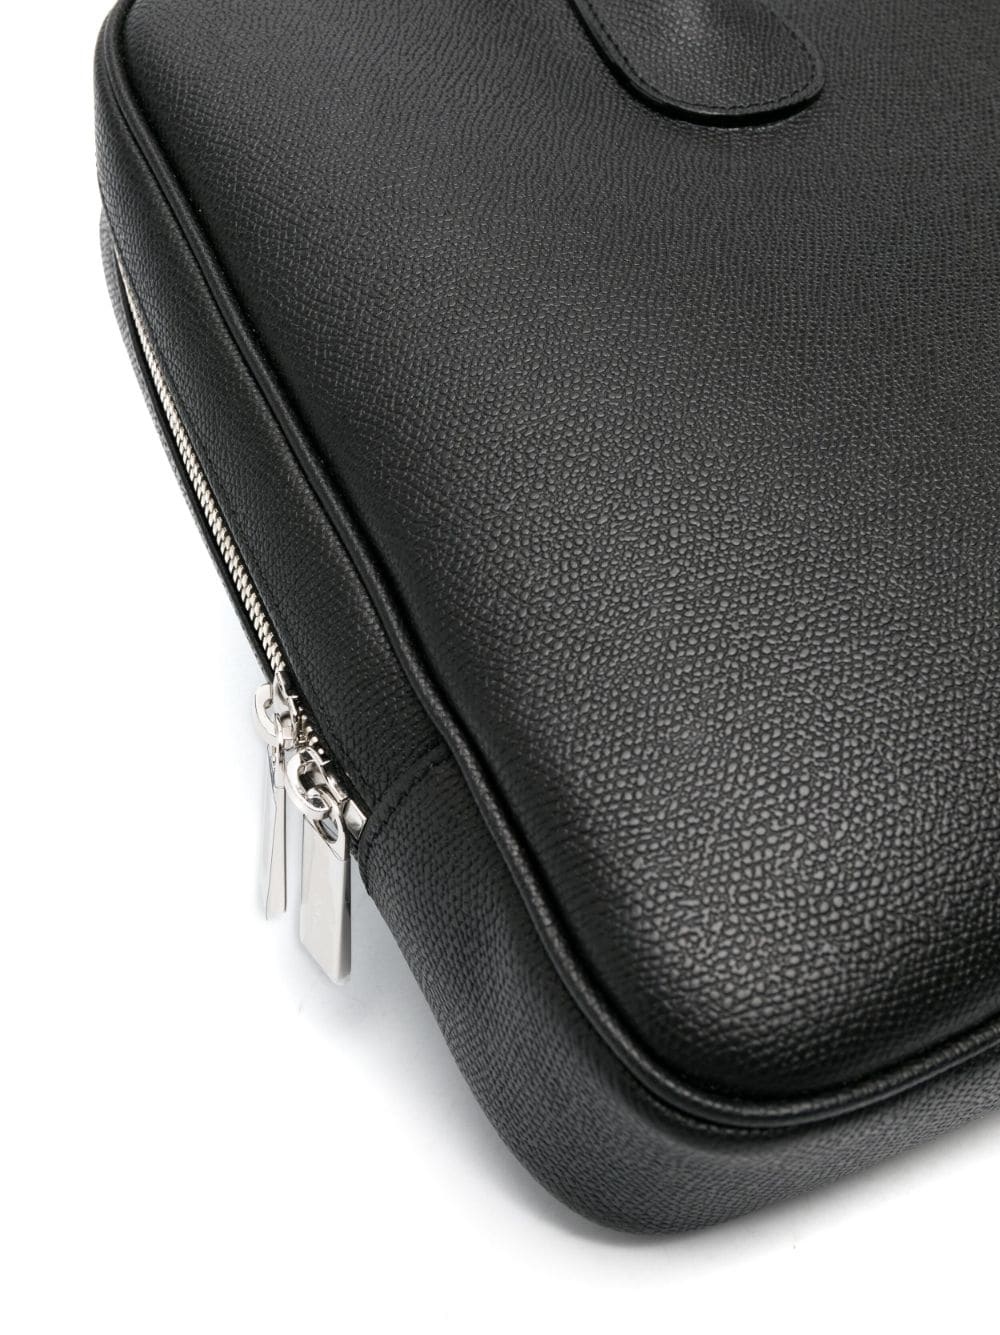 grained-texture leather laptop bag - 3